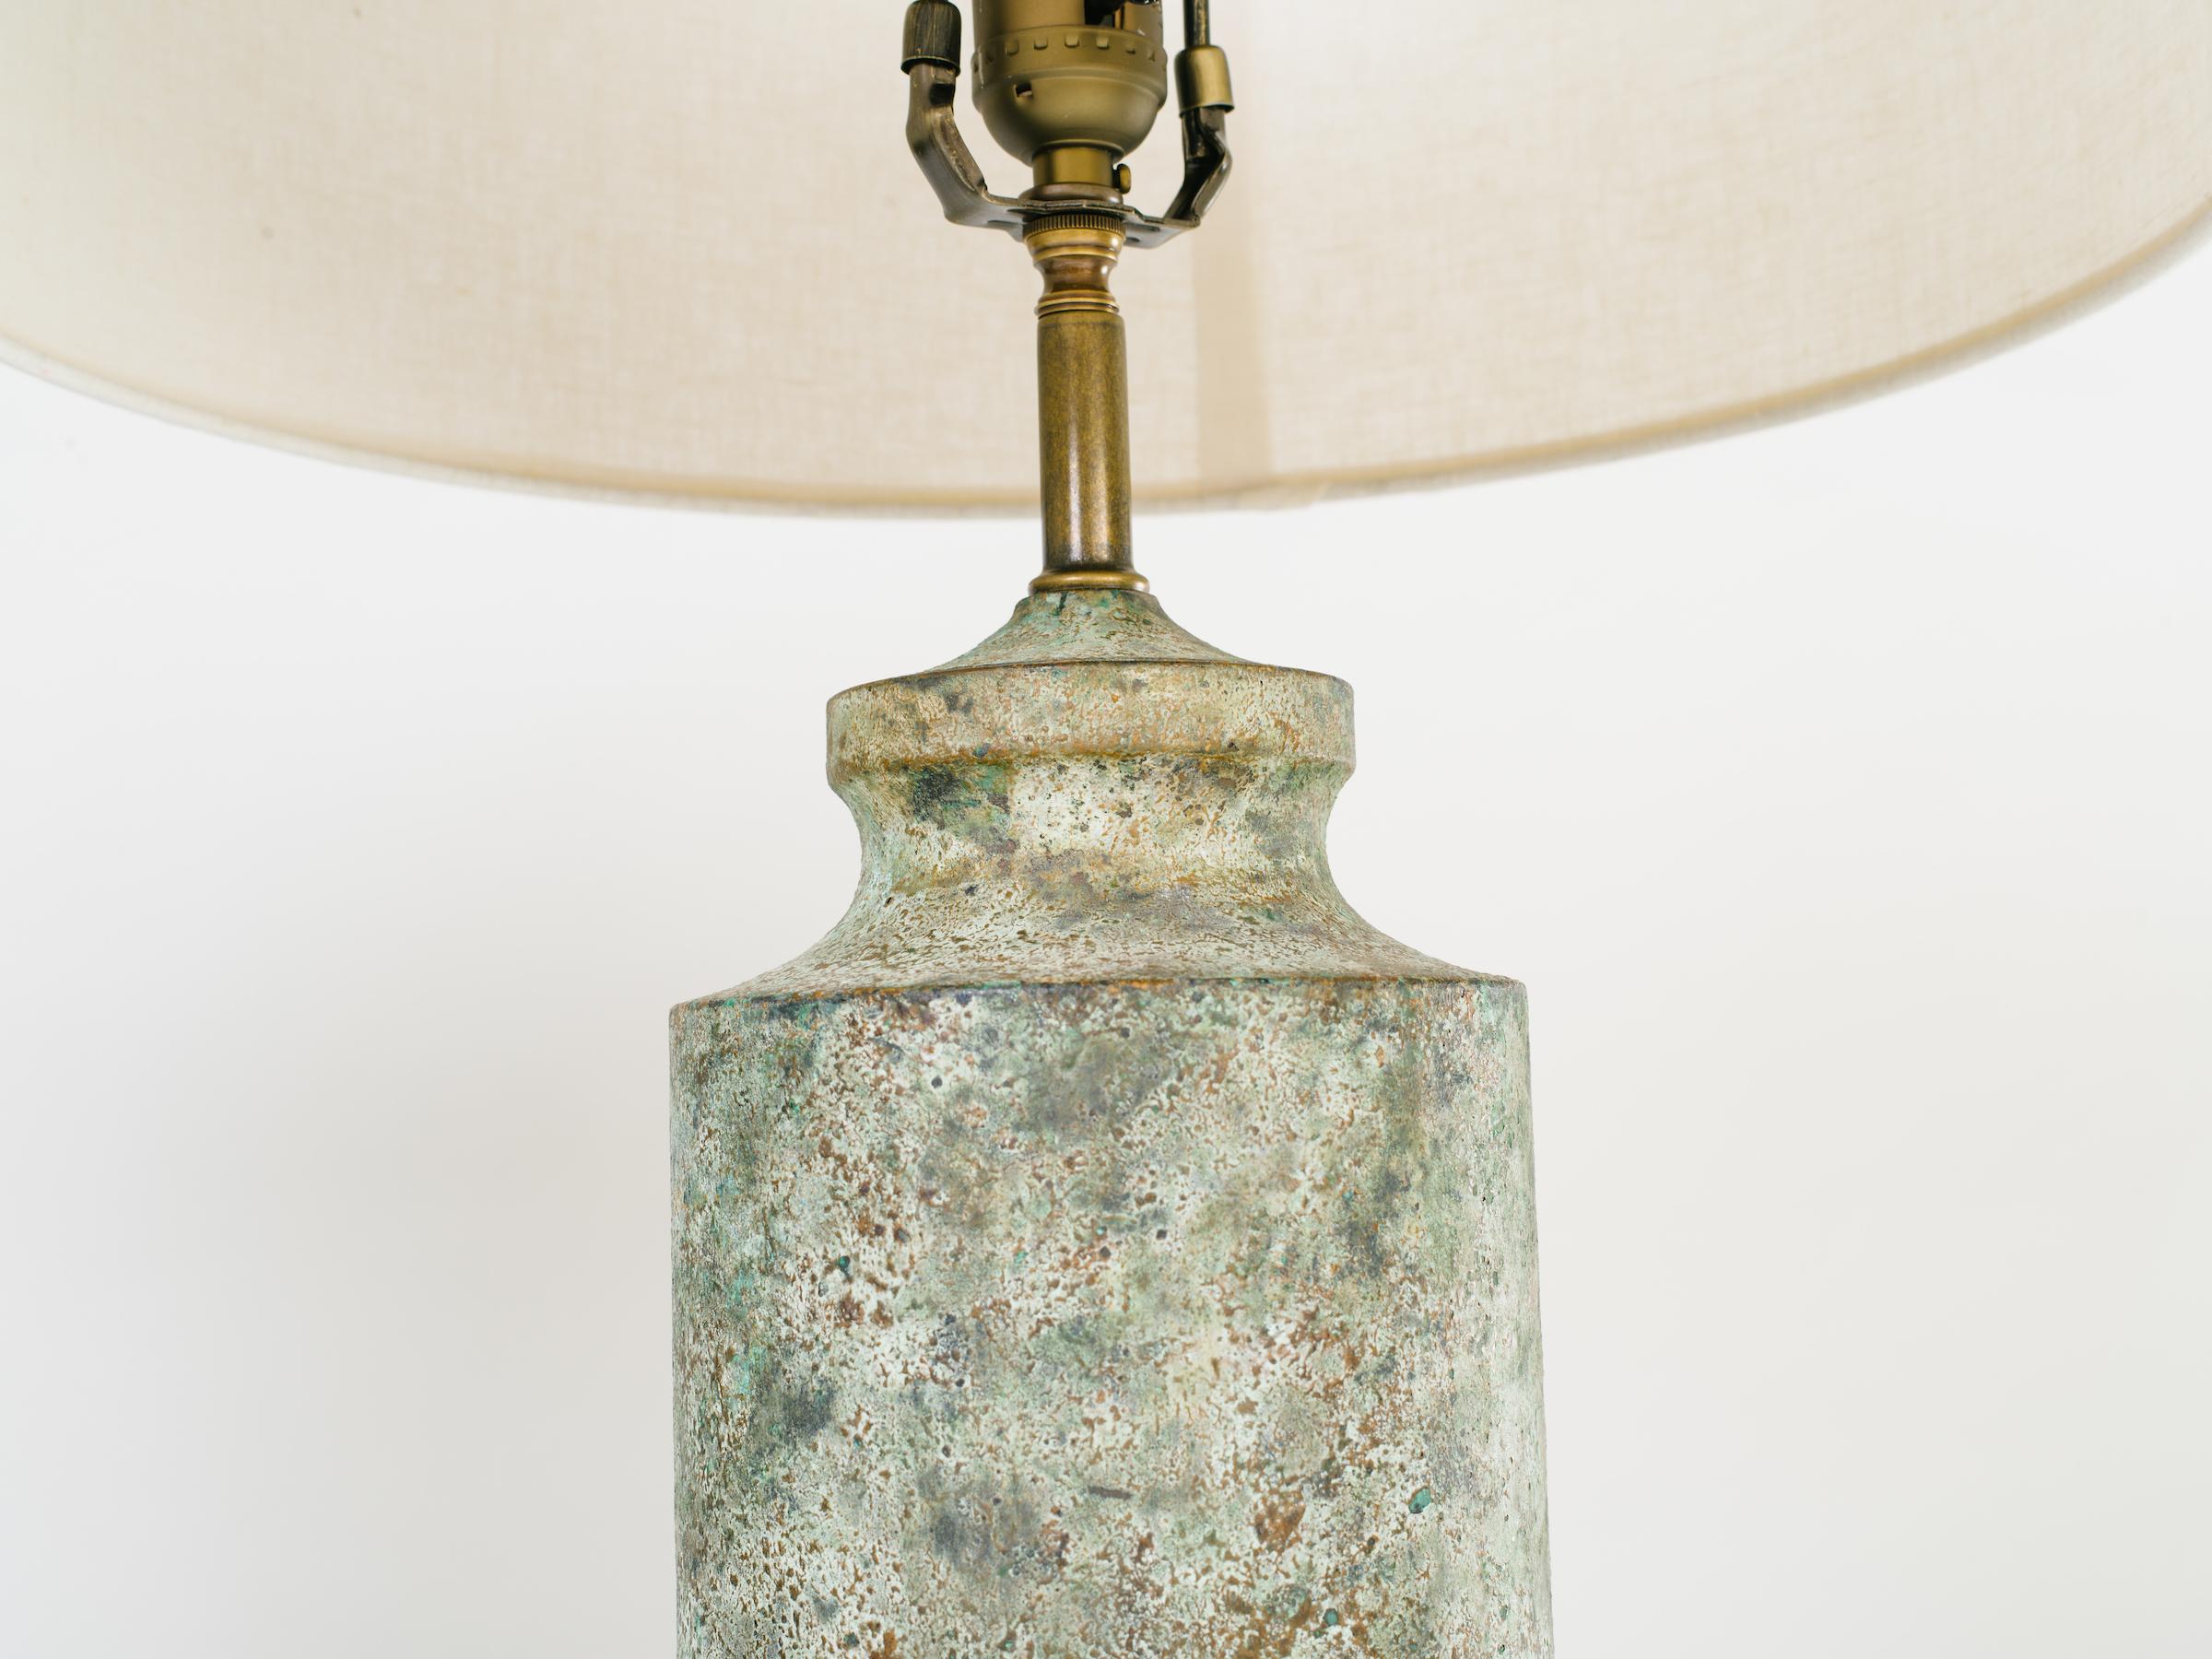 Pair of Mid-Century Modern Pagoda Lamps in Distressed Verdigris Metal, 1960's For Sale 2